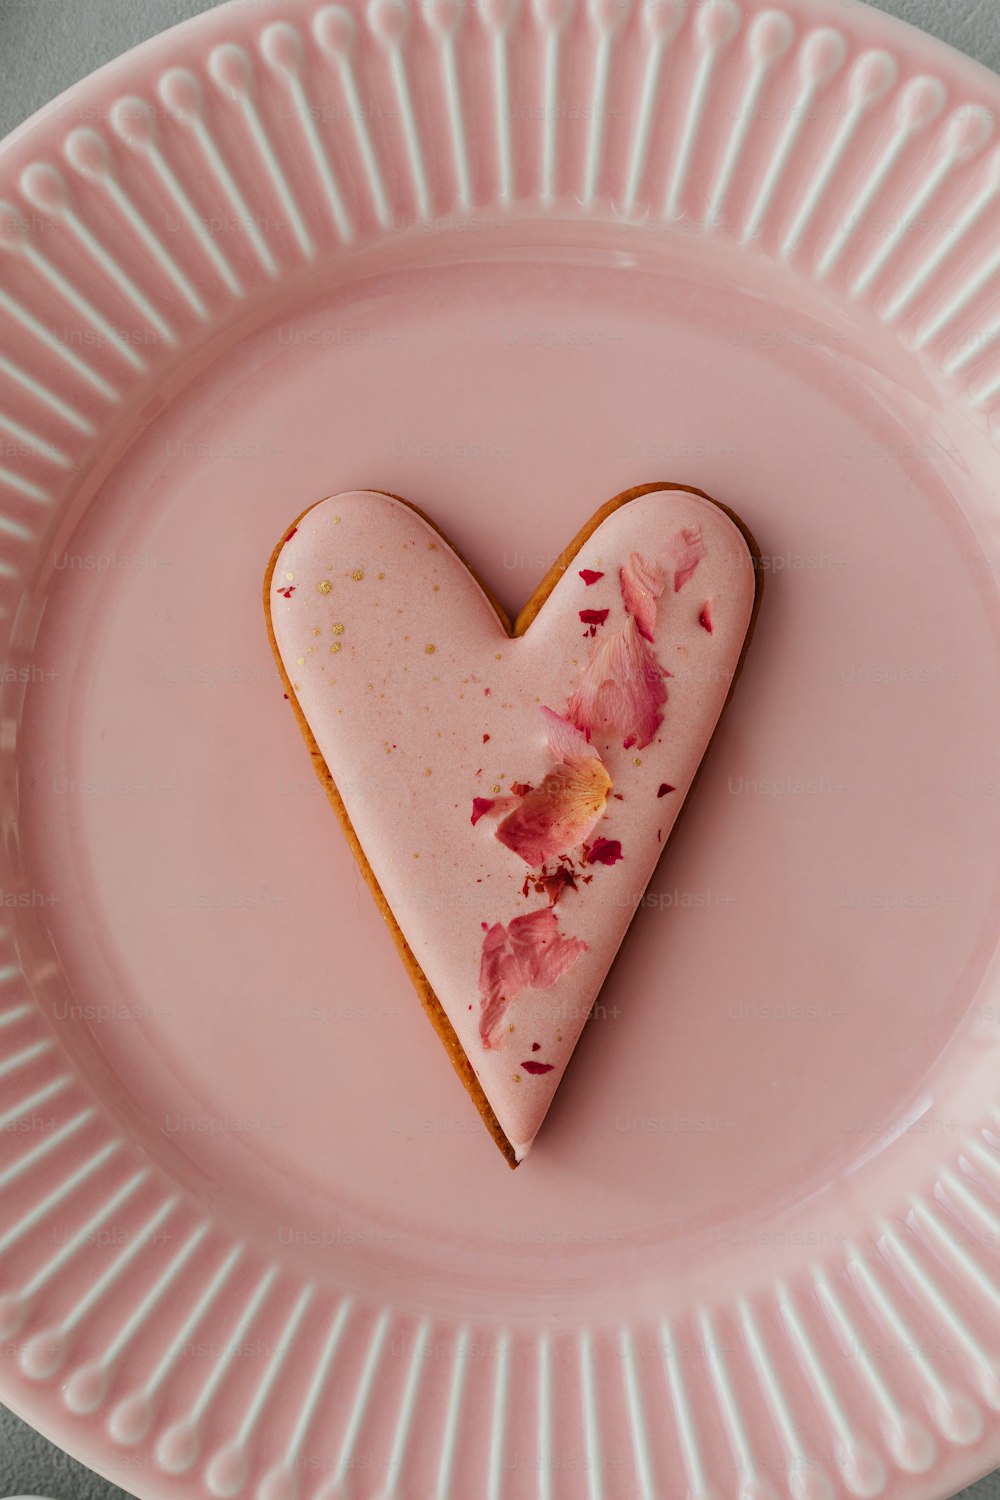 a heart shaped piece of food on a pink plate